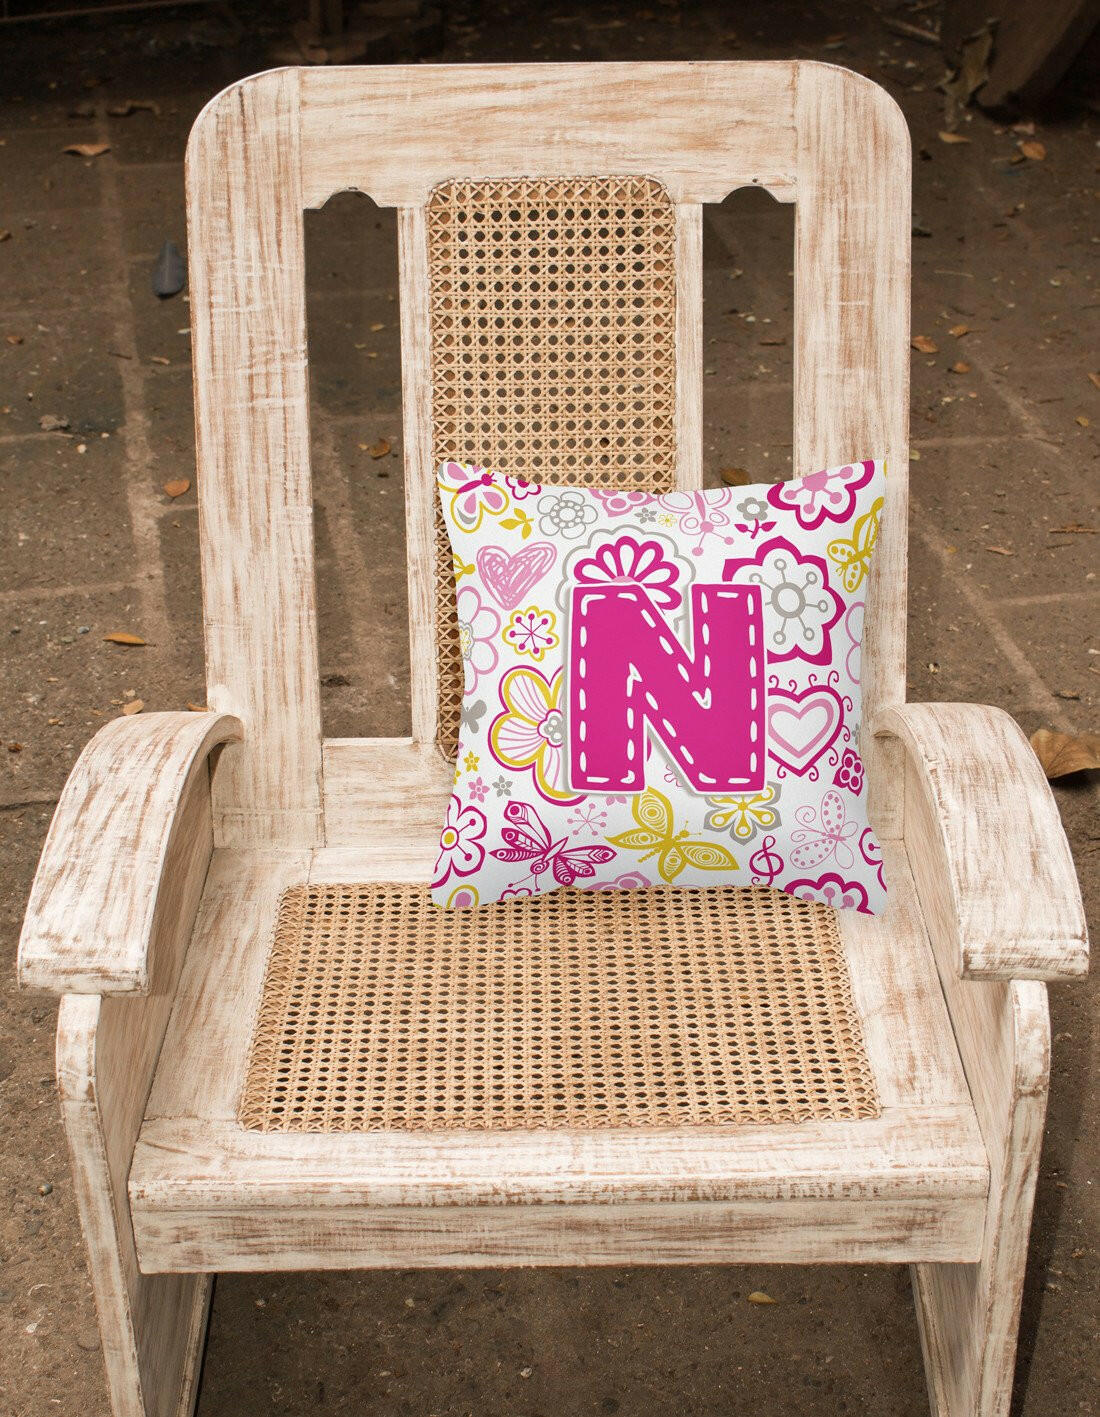 Letter N Flowers and Butterflies Pink Canvas Fabric Decorative Pillow CJ2005-NPW1414 by Caroline's Treasures